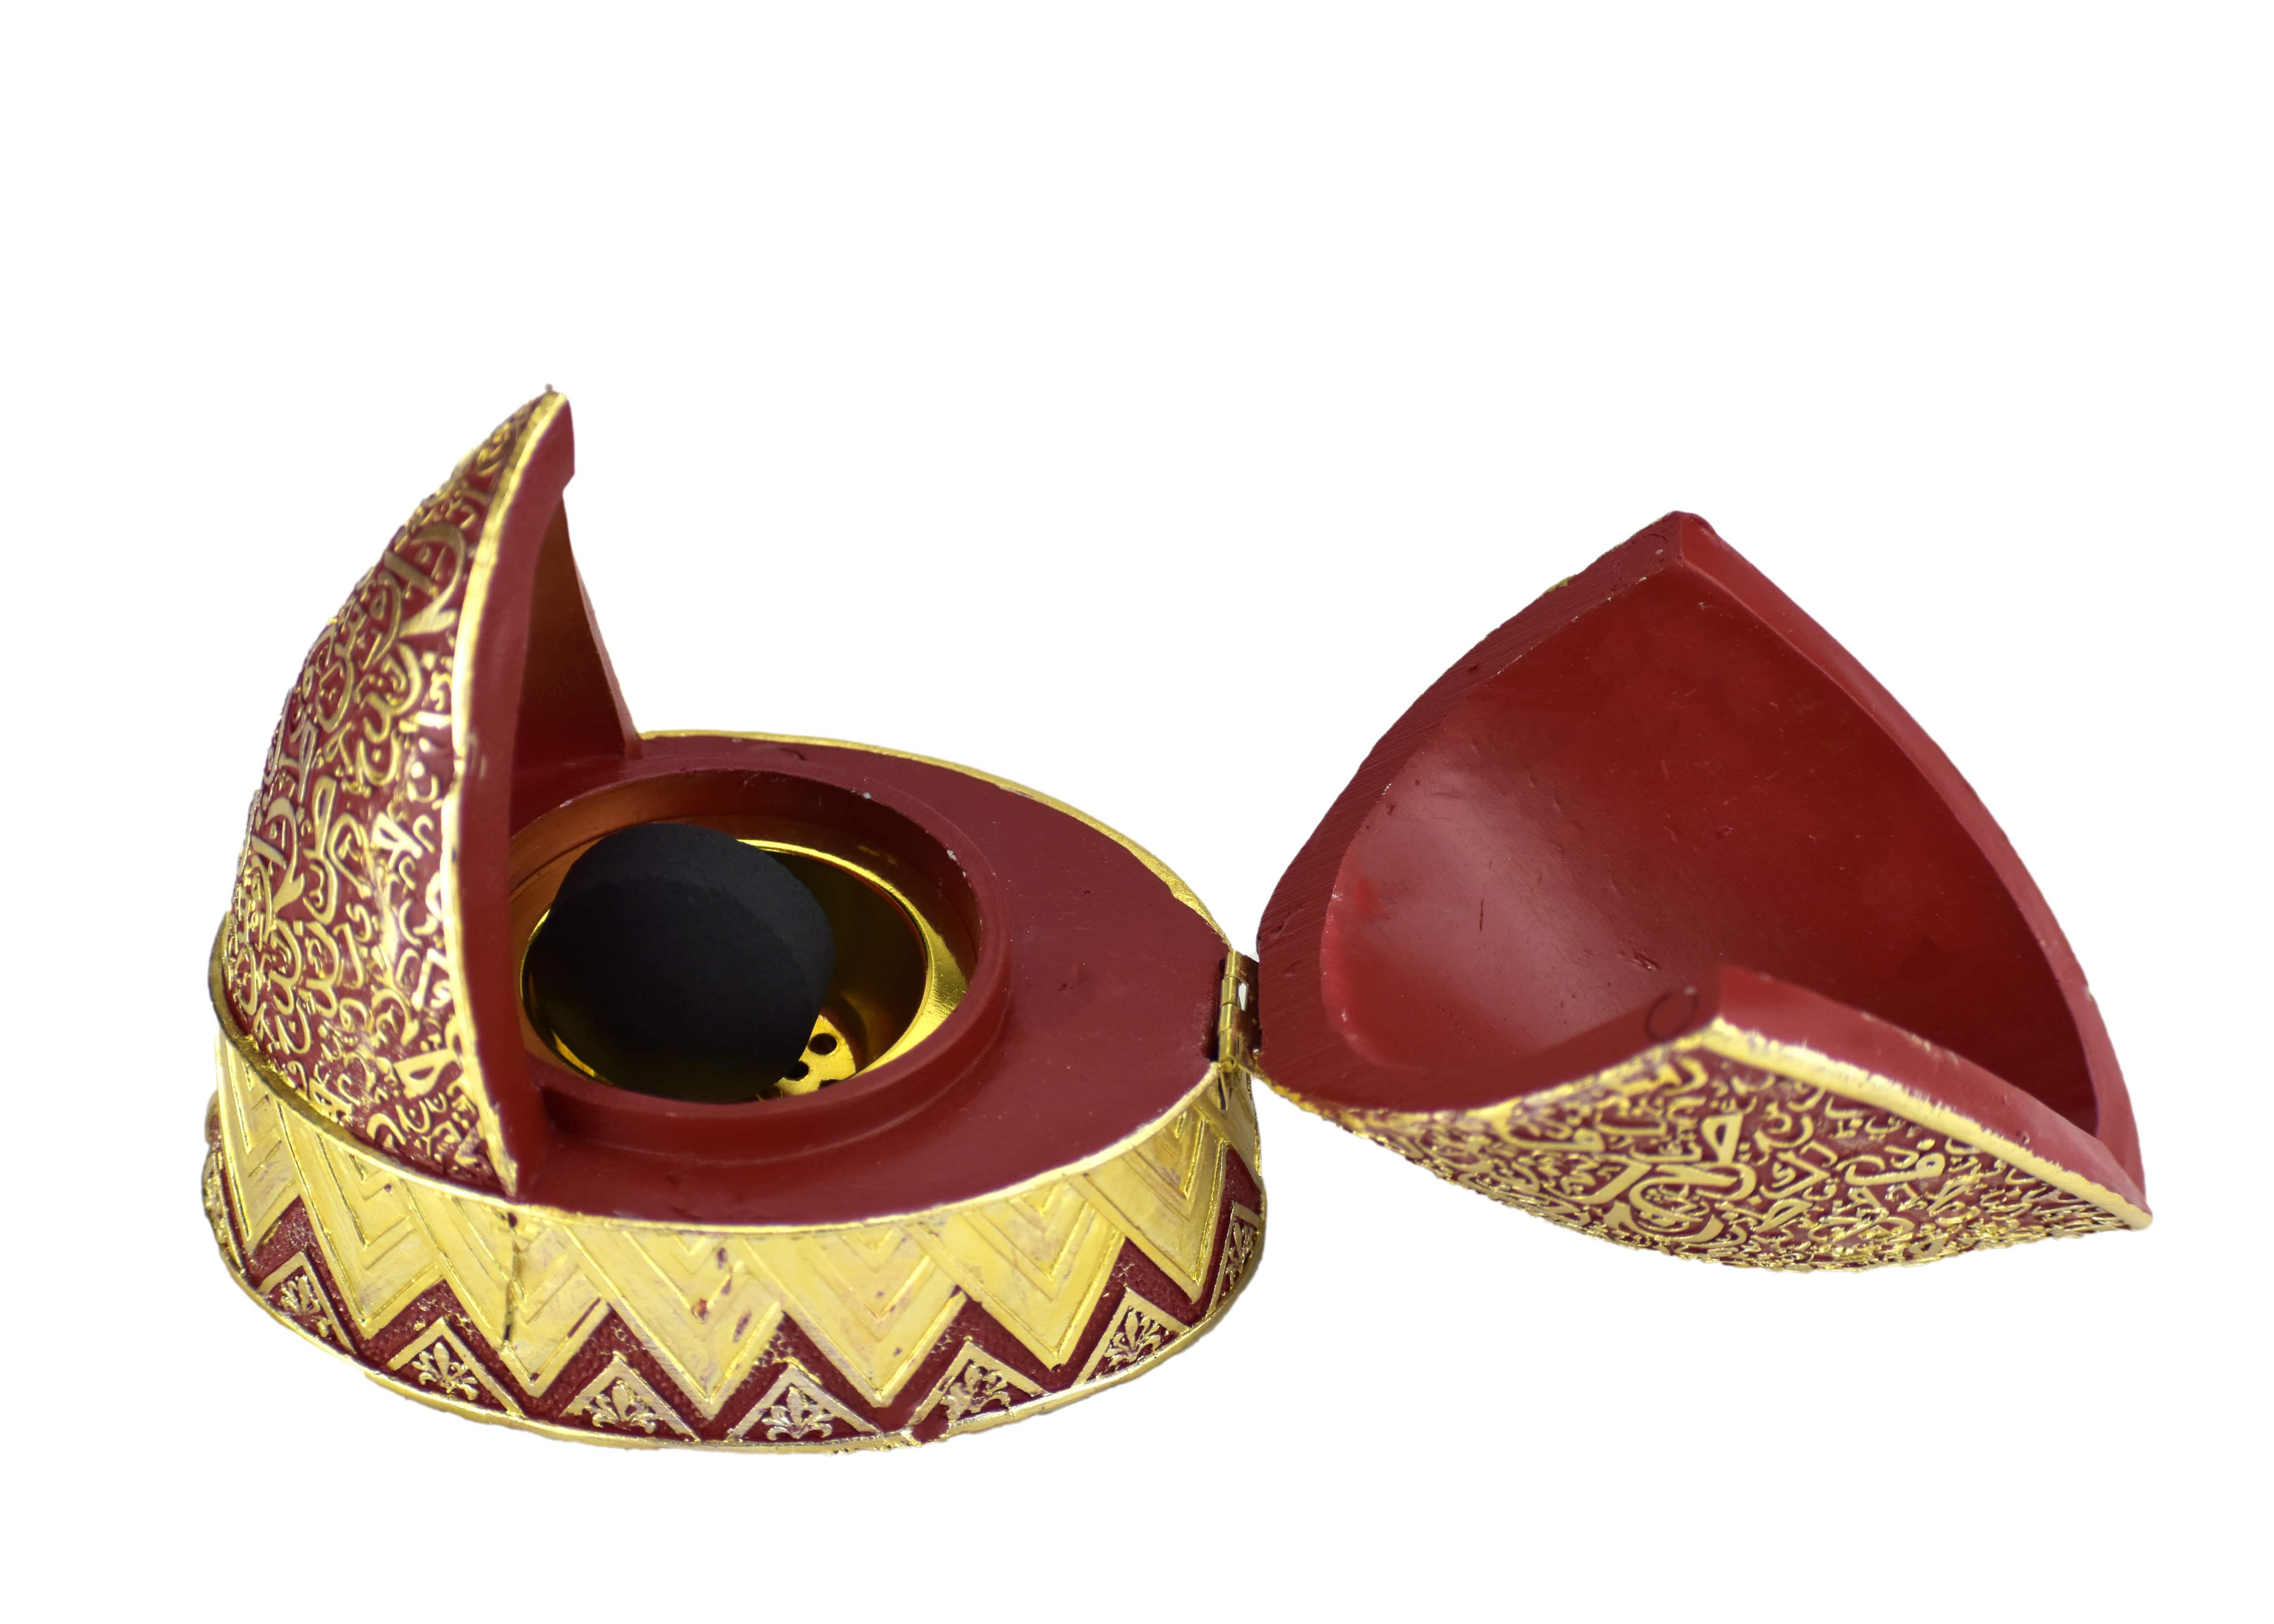 Calligraphy Arched Beehive Dome Style Closed Incense Bakhoor Burner - Red - Intense oud